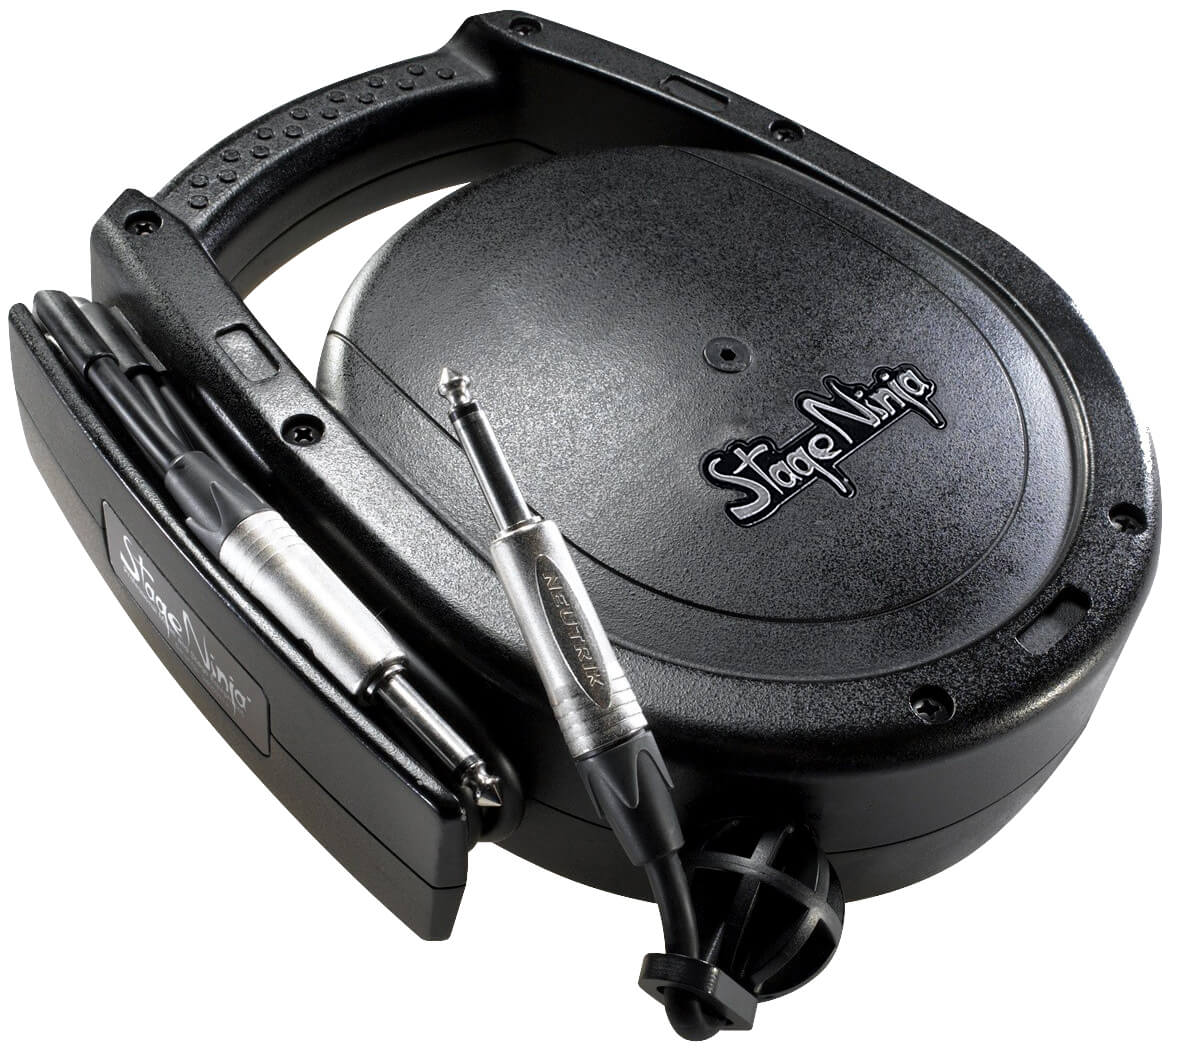 REVIEW: Stage Ninja Retractable Guitar Cable Reel